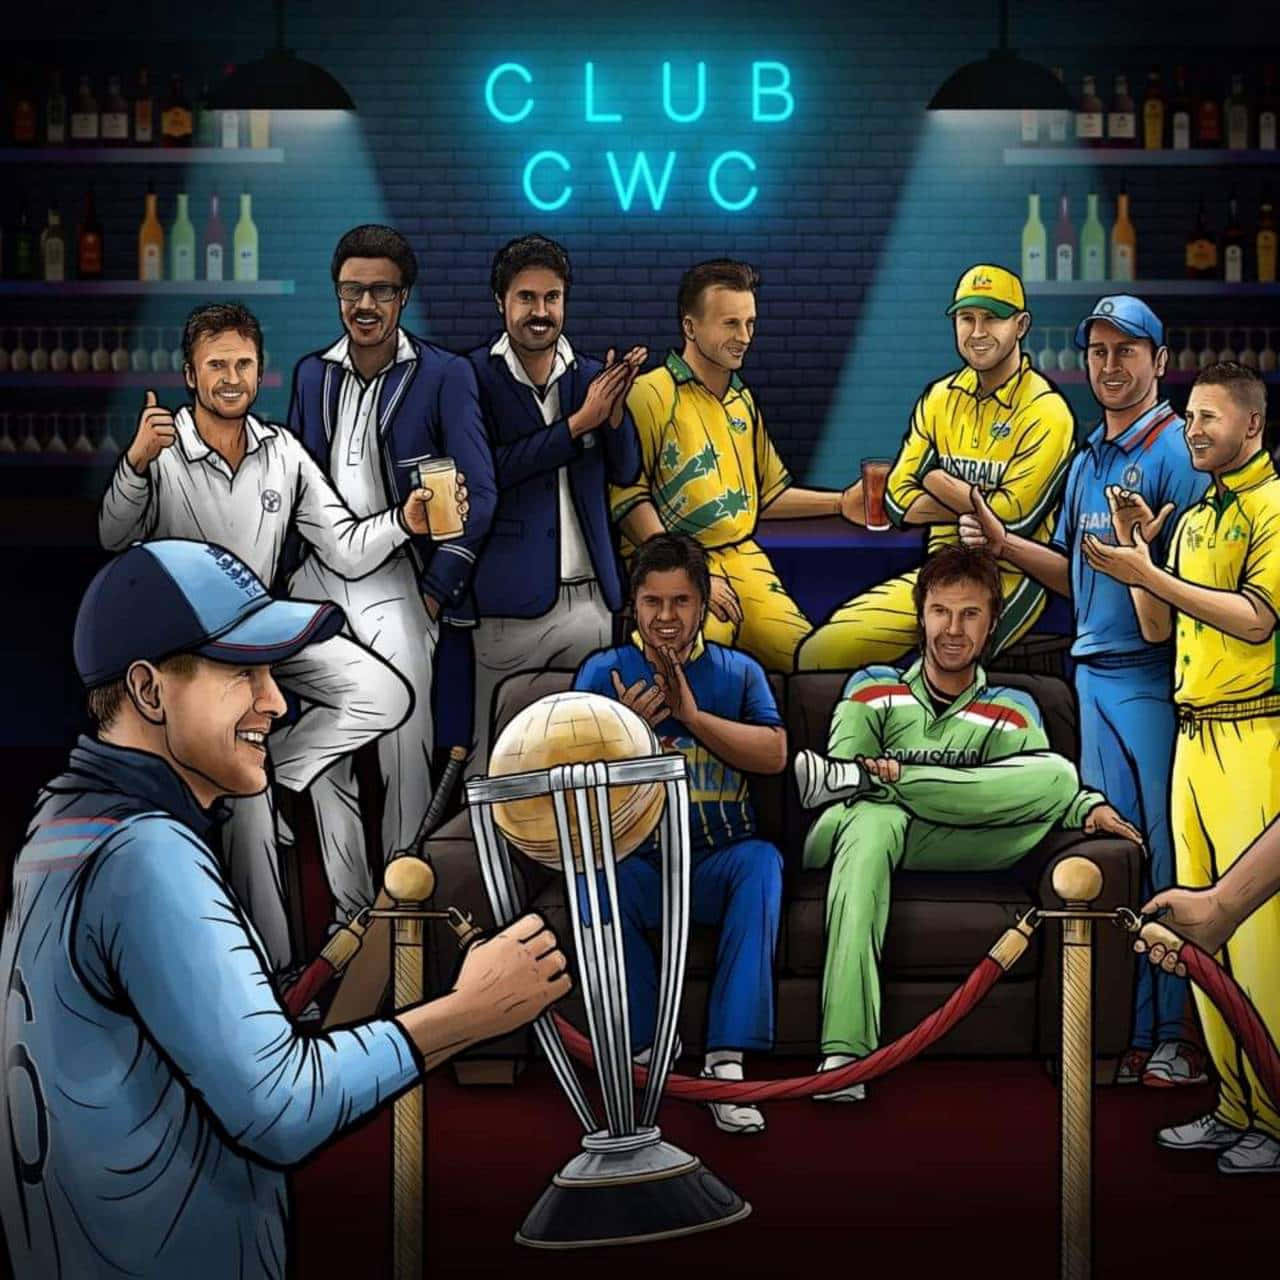 Club Cricket World Cup - A Group Of People In A Bar Wallpaper